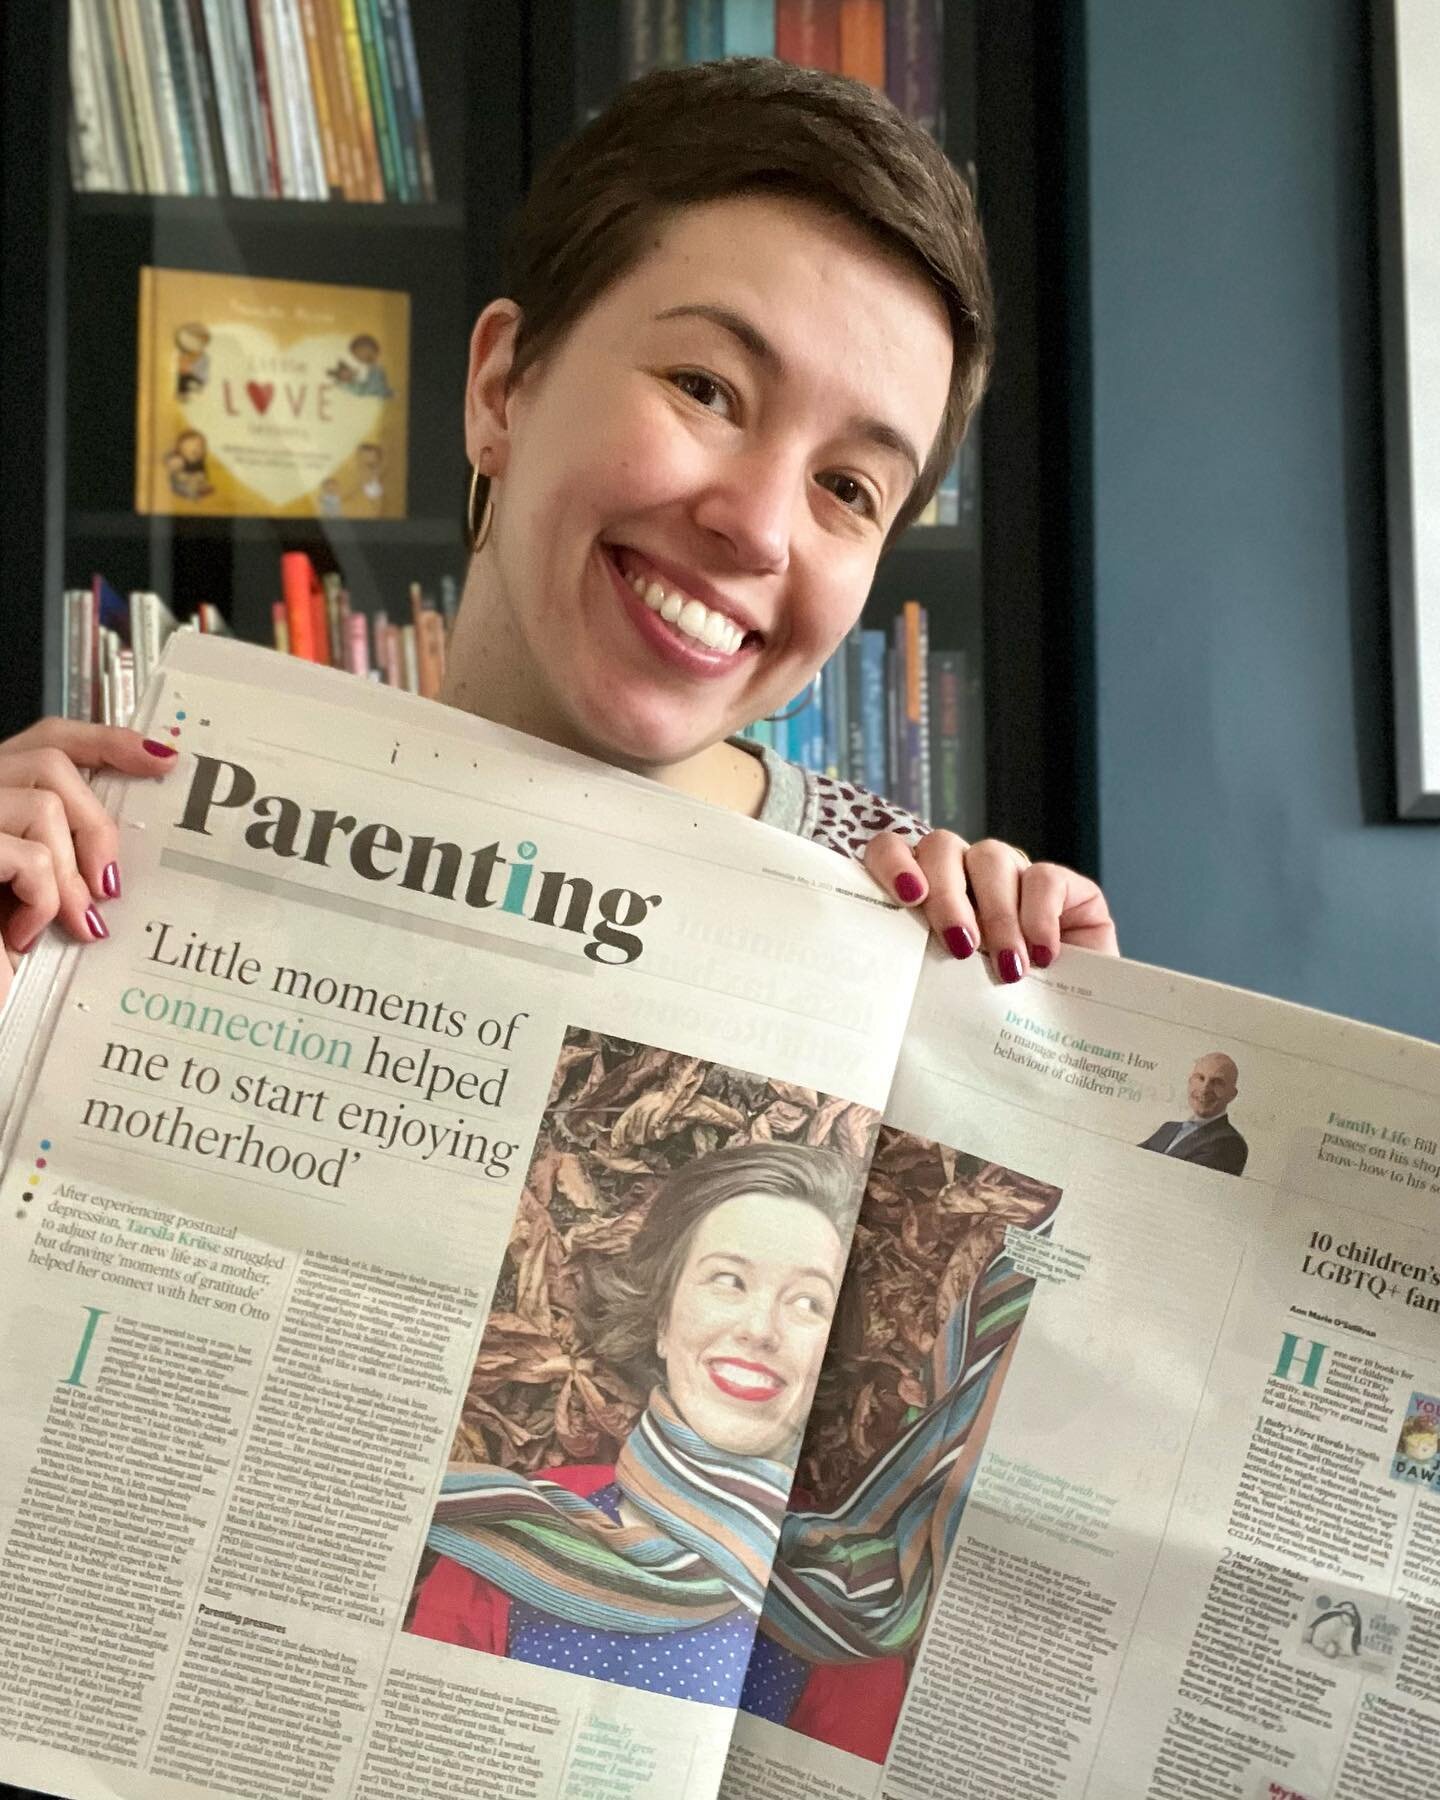 Today I&rsquo;m sharing an honest and wholesome piece in the Irish Independent on how my latest book Little Love Lessons (The O&rsquo;Brien Press) bloomed from my experience with postnatal depression.

If you are struggling with parenthood, seek out 